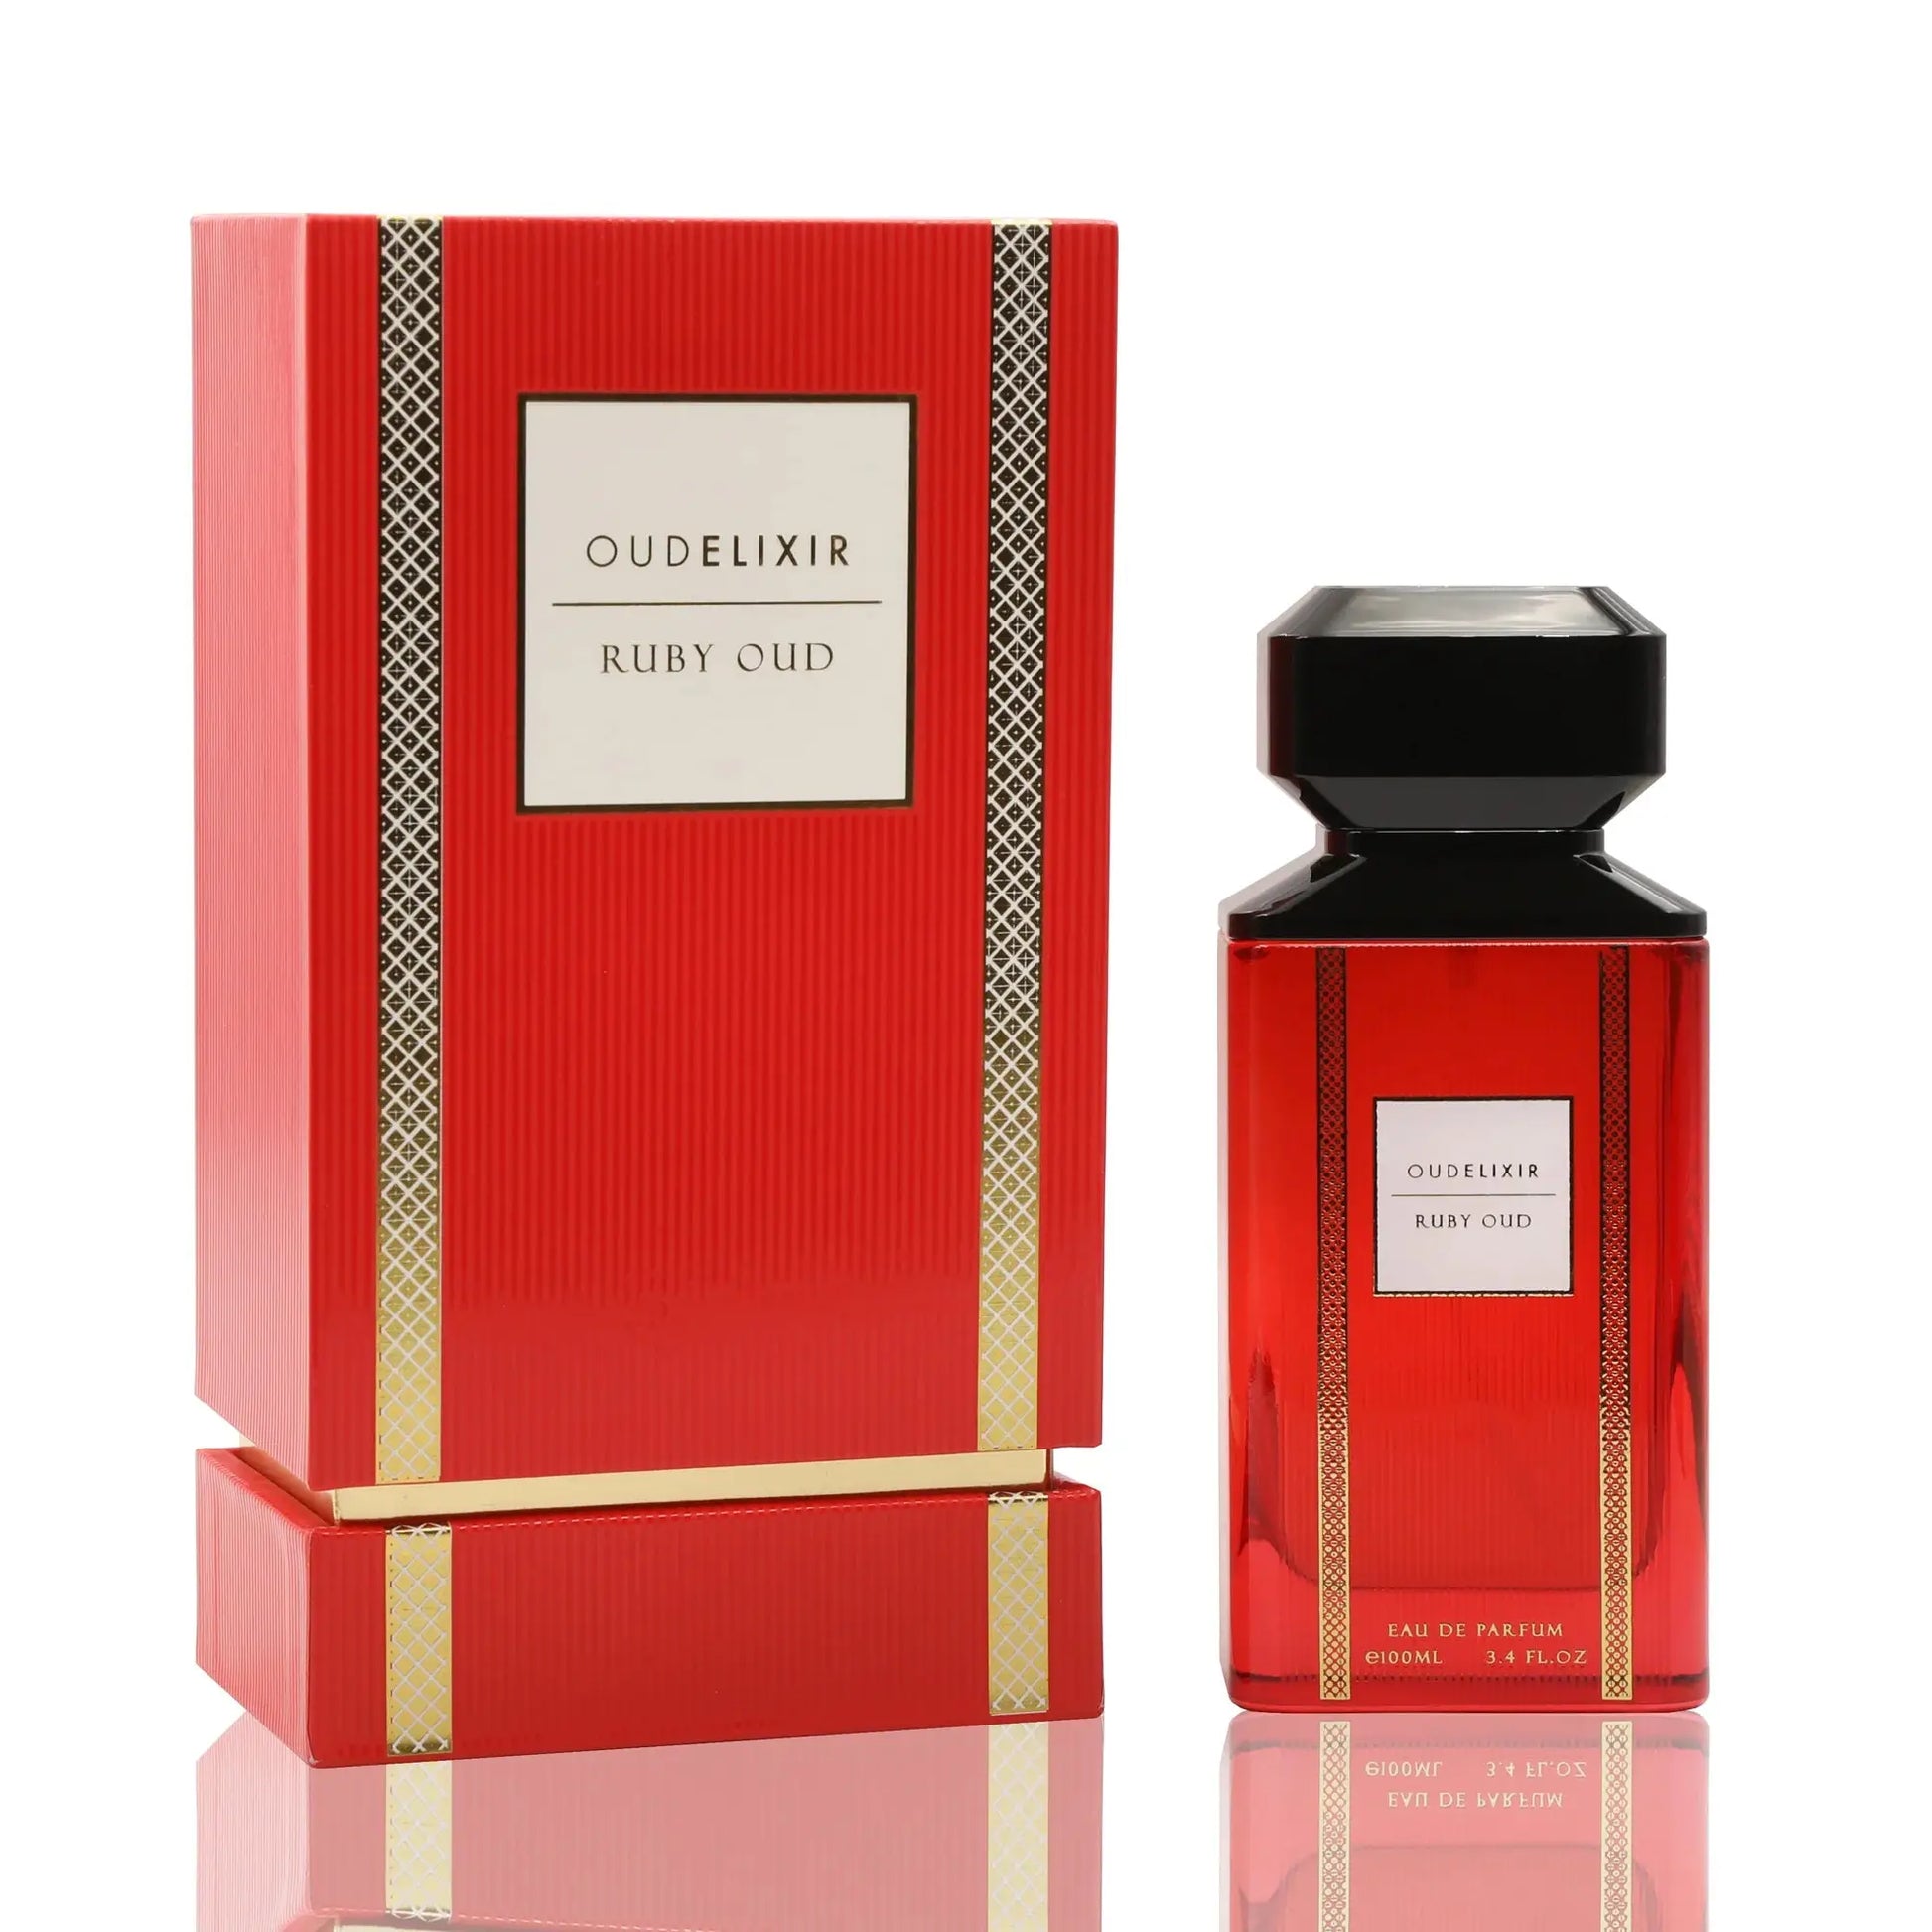 Oud Elixir Ruby EDP 100ml bottle showcasing its elegant design and deep ruby color, perfect for conveying luxury and sophistication.